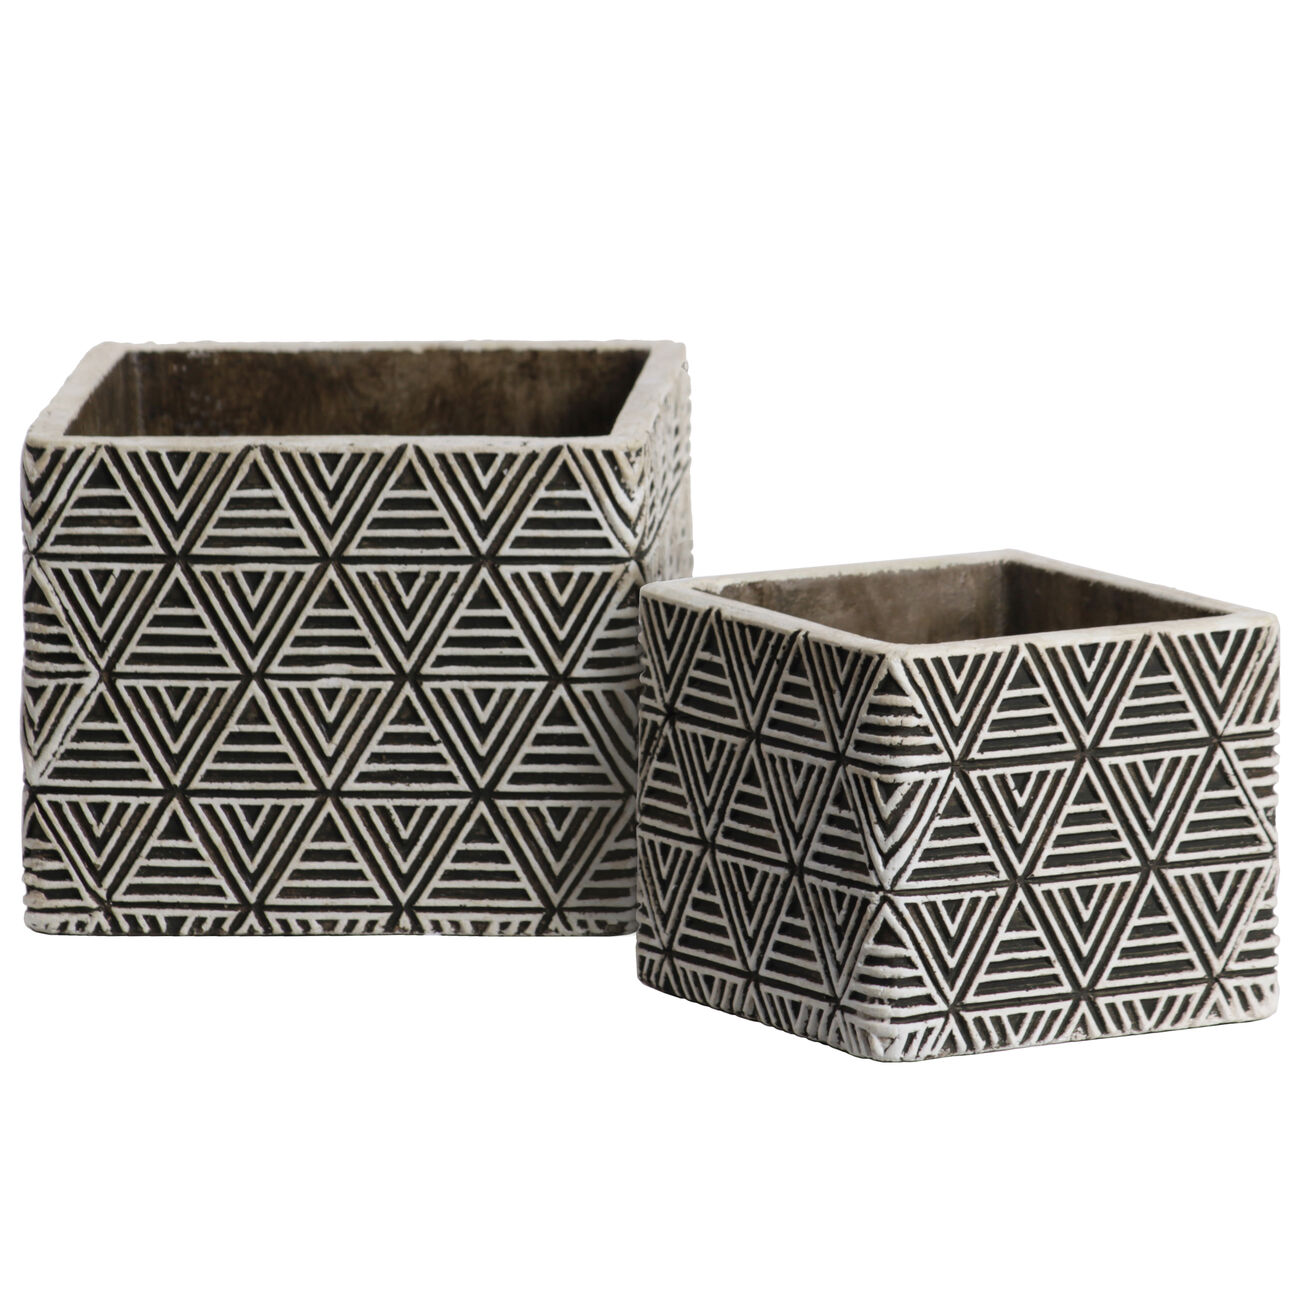 Square Cement Pot with Embossed Triangle Design, Set of 2, Black and White